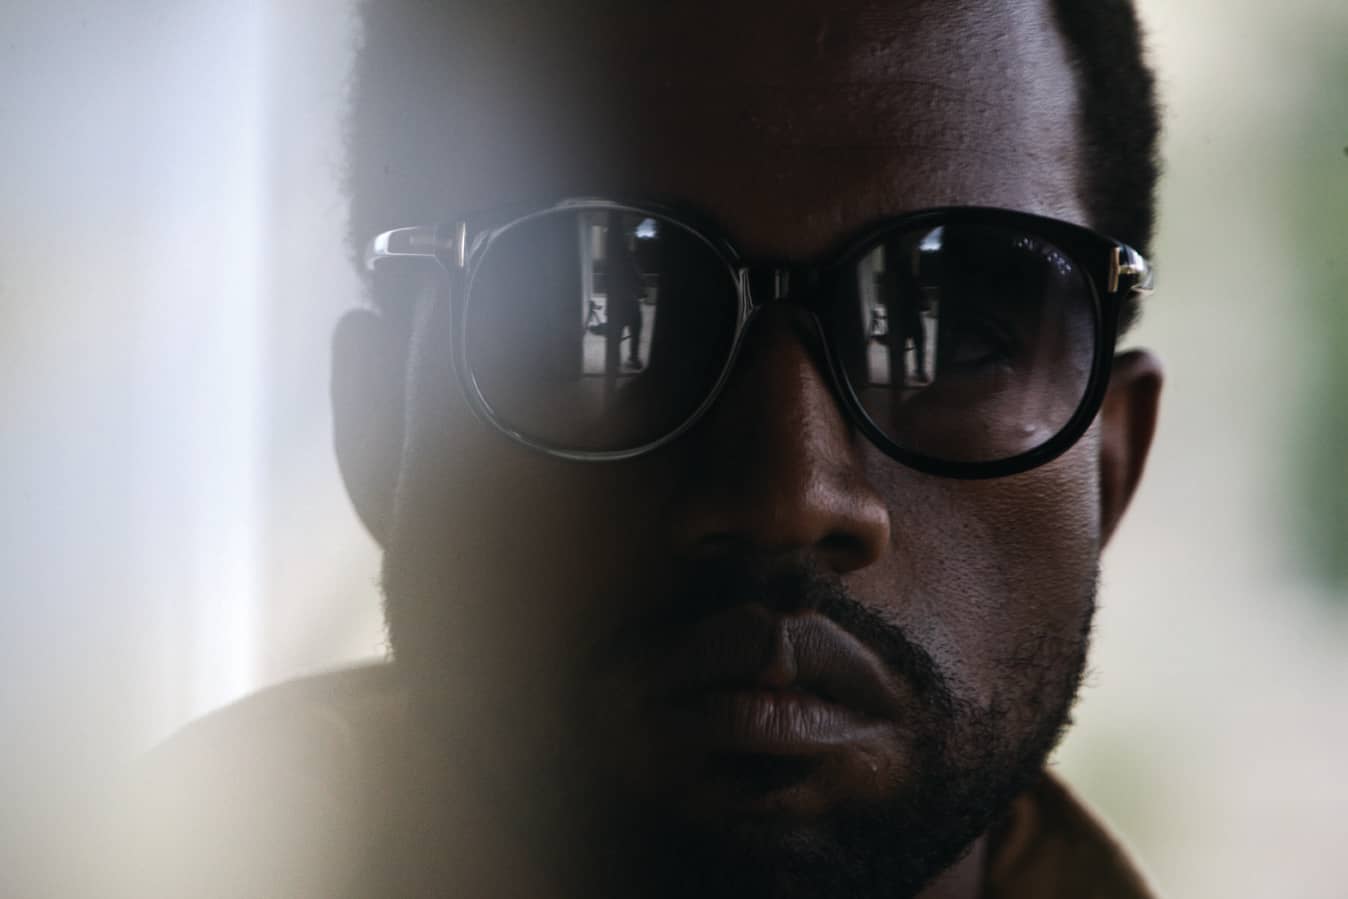 Kanye West Unedited: The Complete FADER Interview, 2008 | The FADER